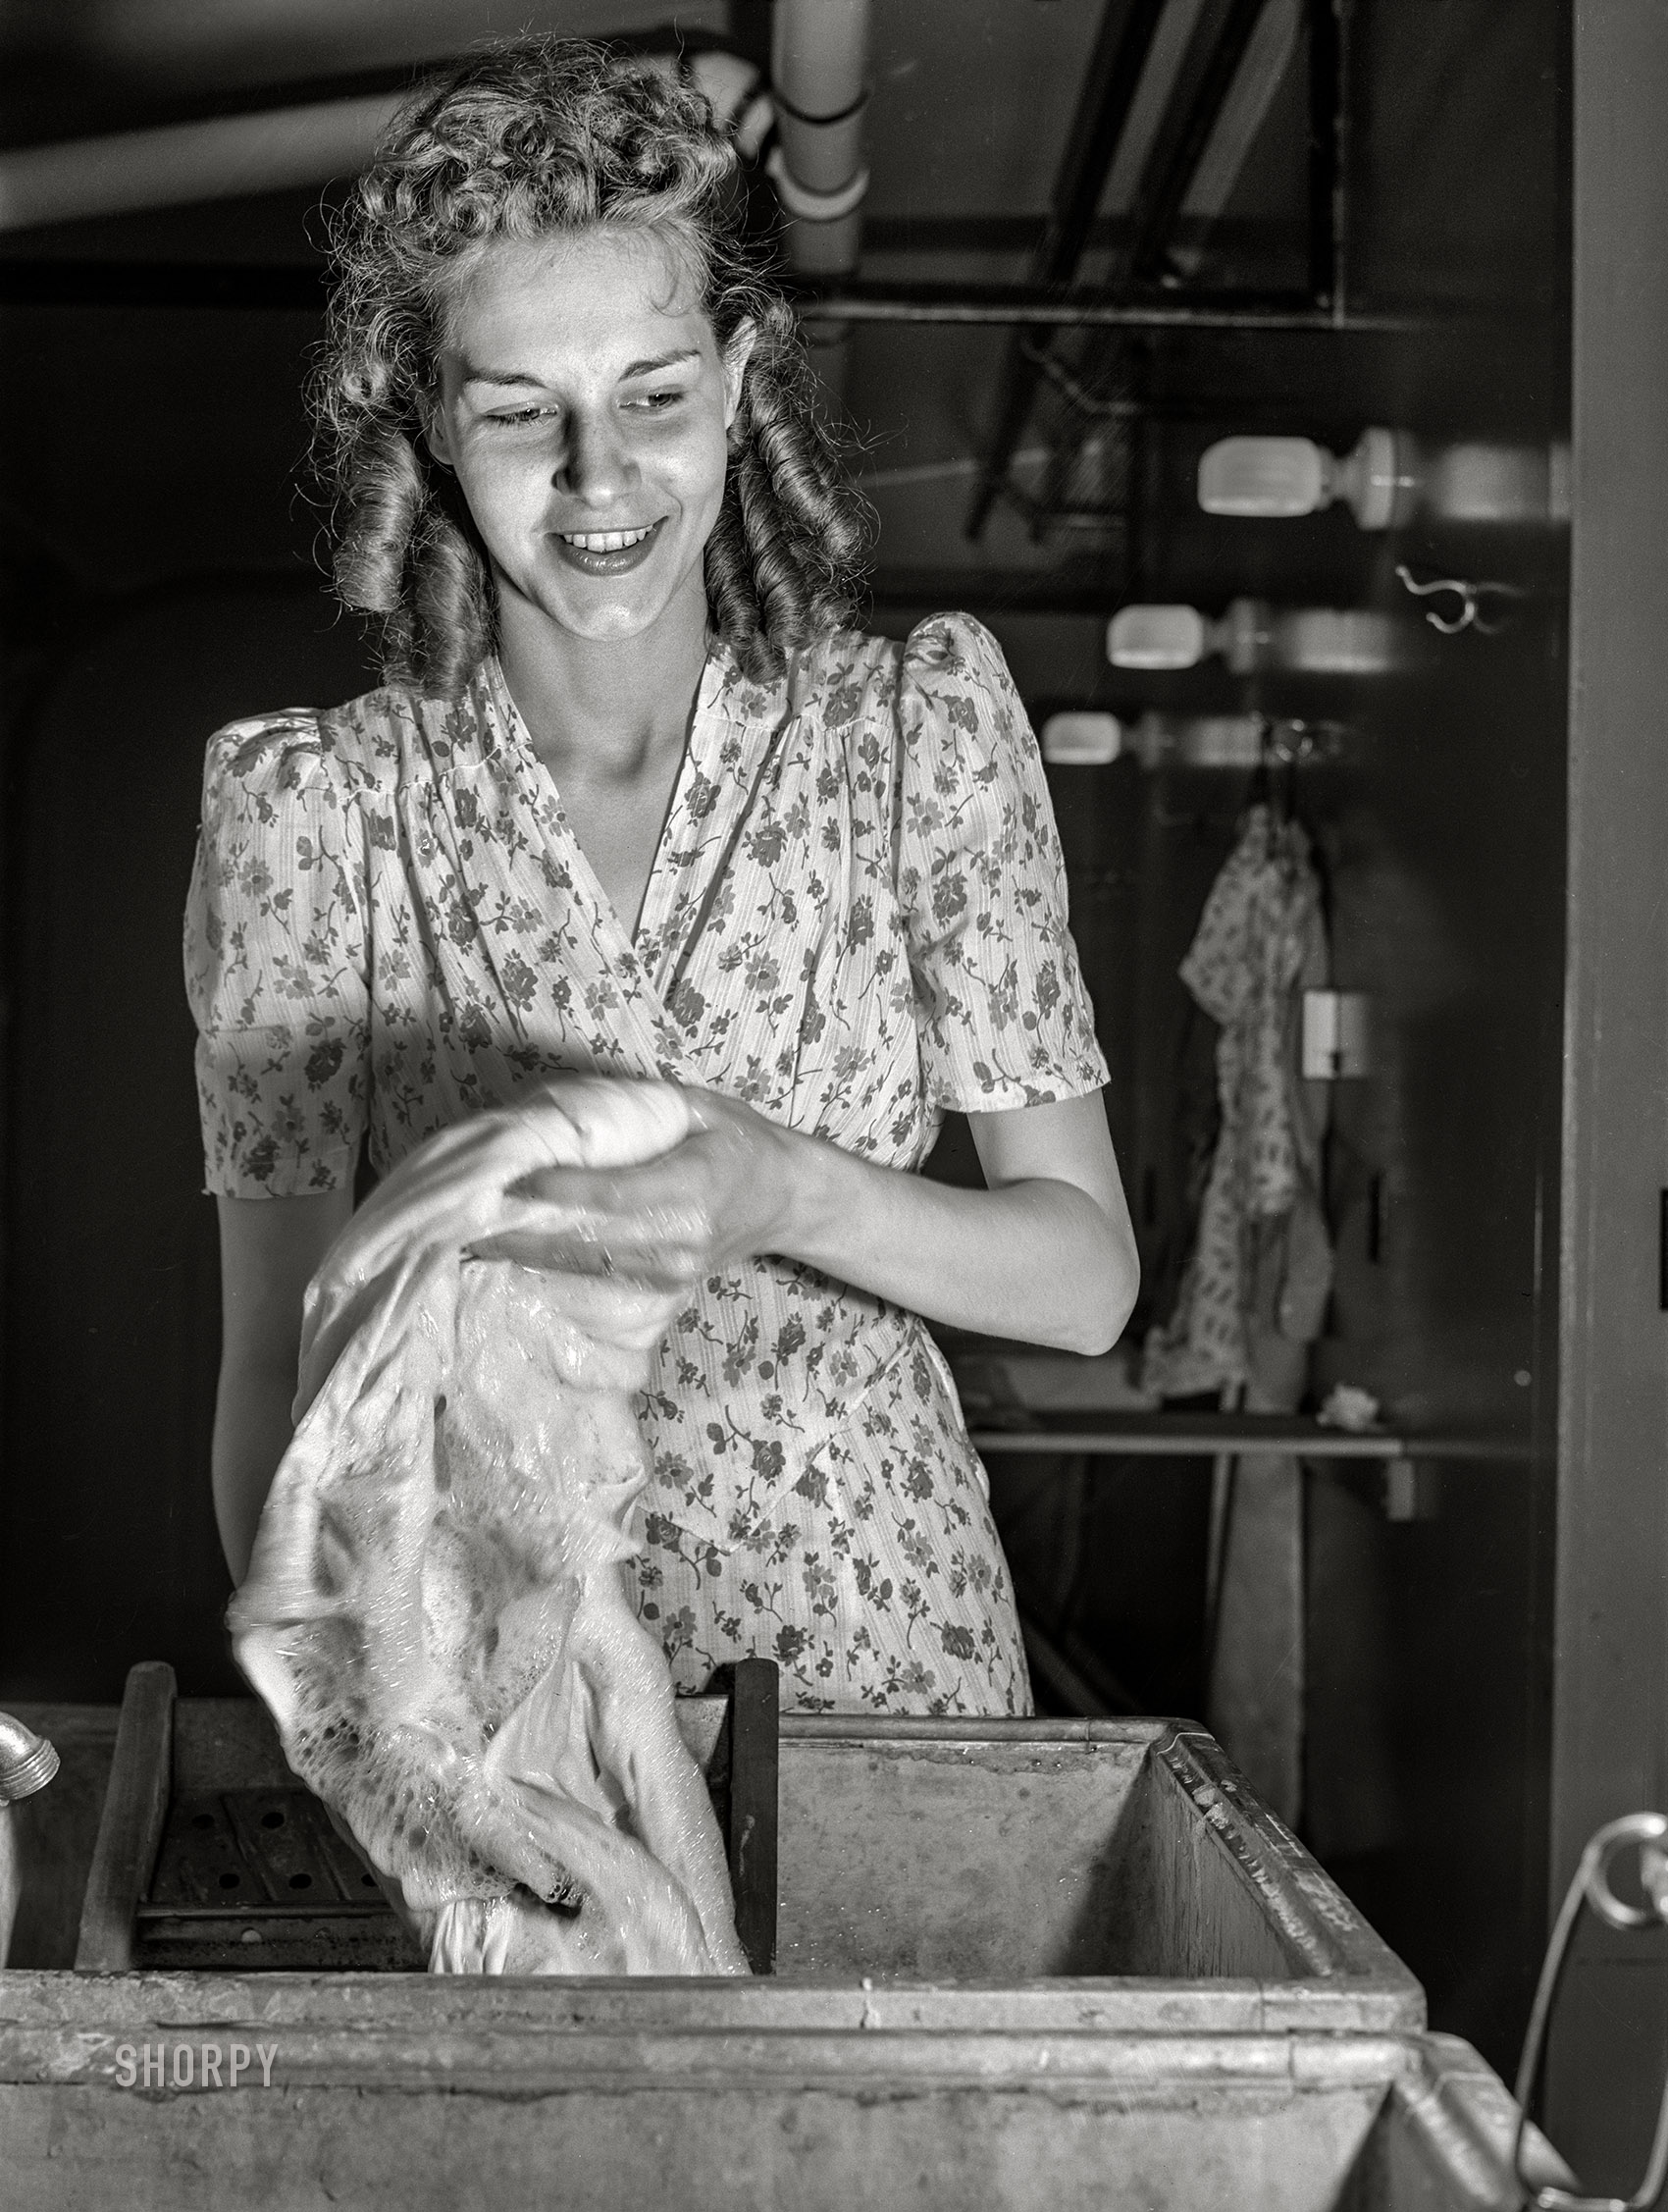 June 1941. "Wife of defense worker washing clothes in utility building at FSA trailer camp. Erie, Pennsylvania." Photo by John Vachon for the Farm Security Administration. View full size.